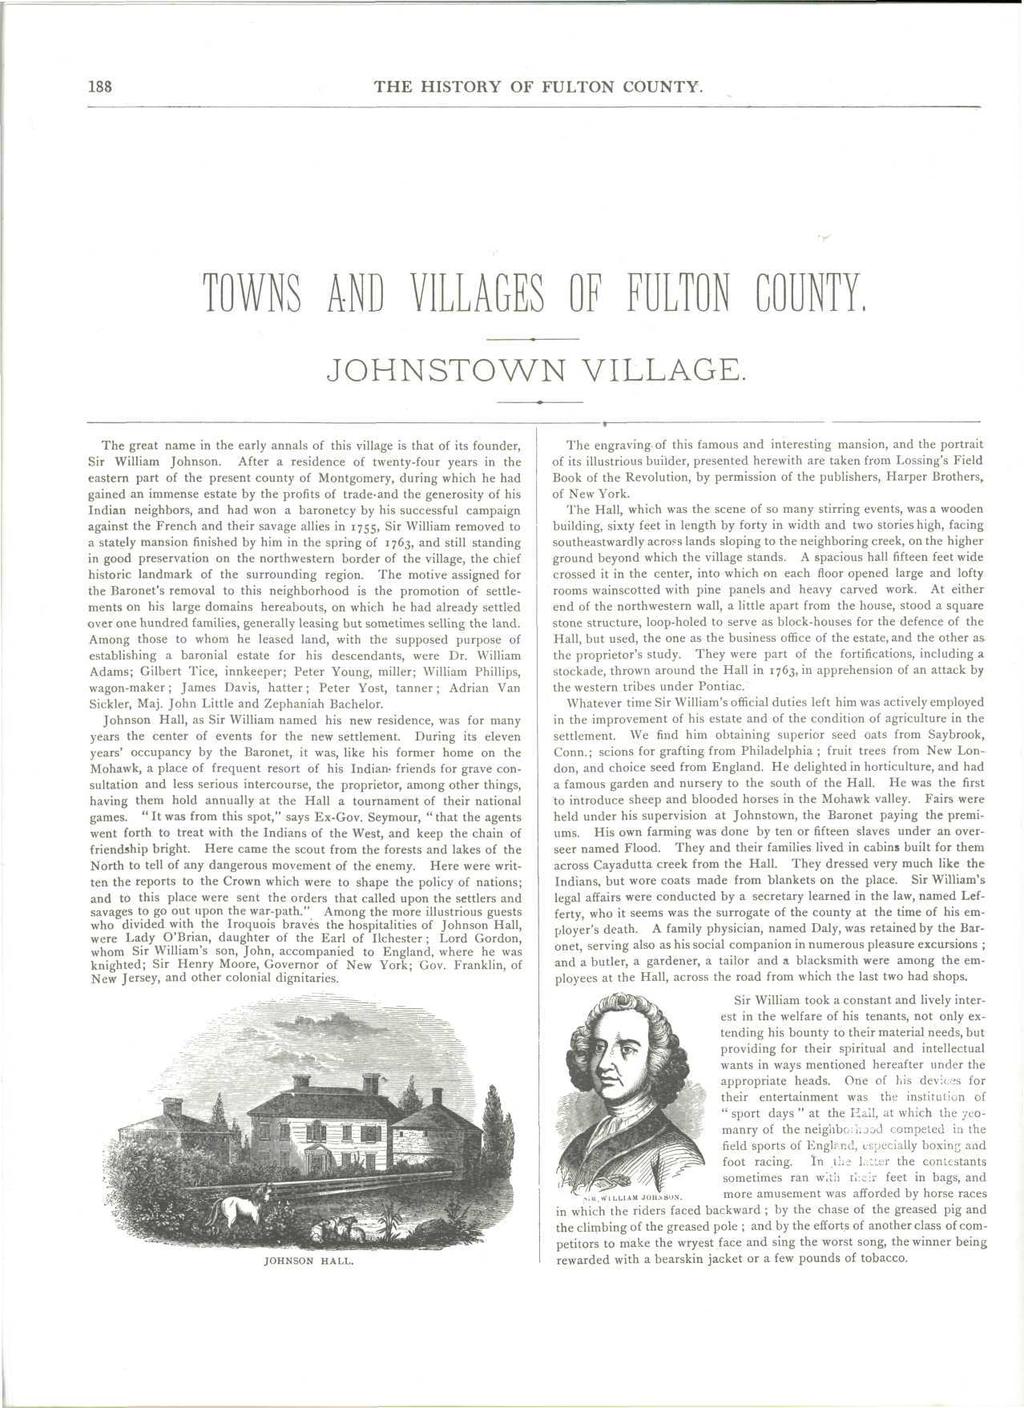 188 THE HISTORY OF FULTON COUNTY. TOWNS AND VILLAGES OF FULTON COUNTY. JOHNSTOWN VILLAGE. The great name in the early annals of this village is that of its founder, Sir William Johnson.